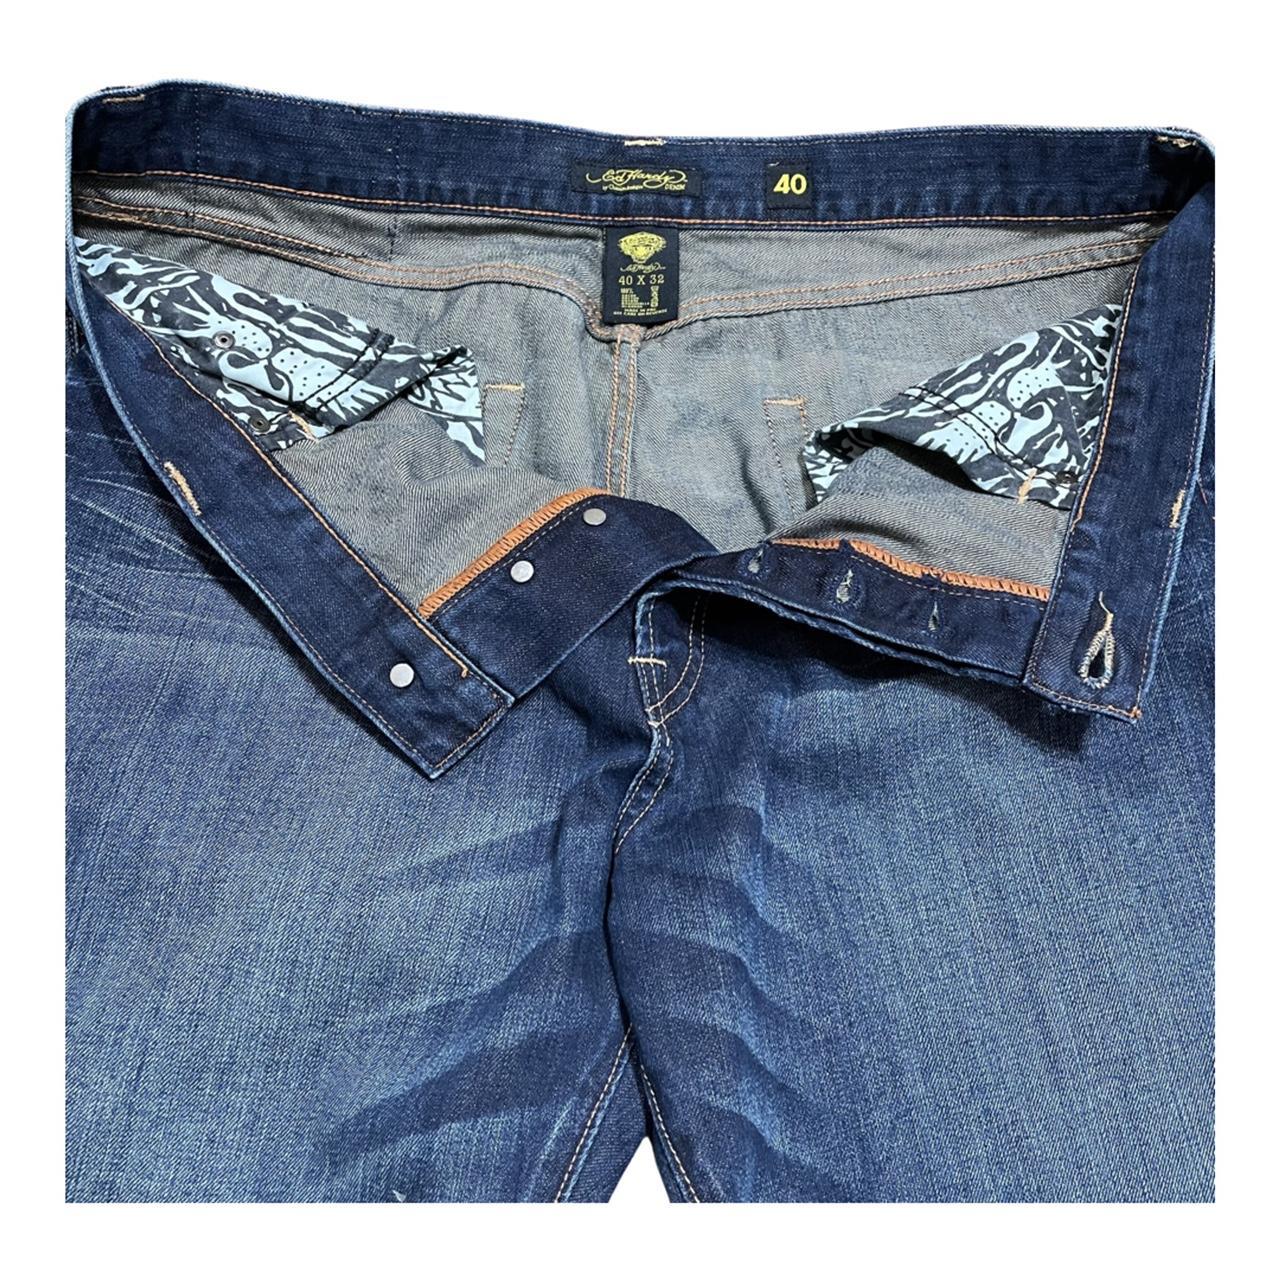 Ed Hardy Men’s Jeans Embroidered McQueen Pirate... - Depop